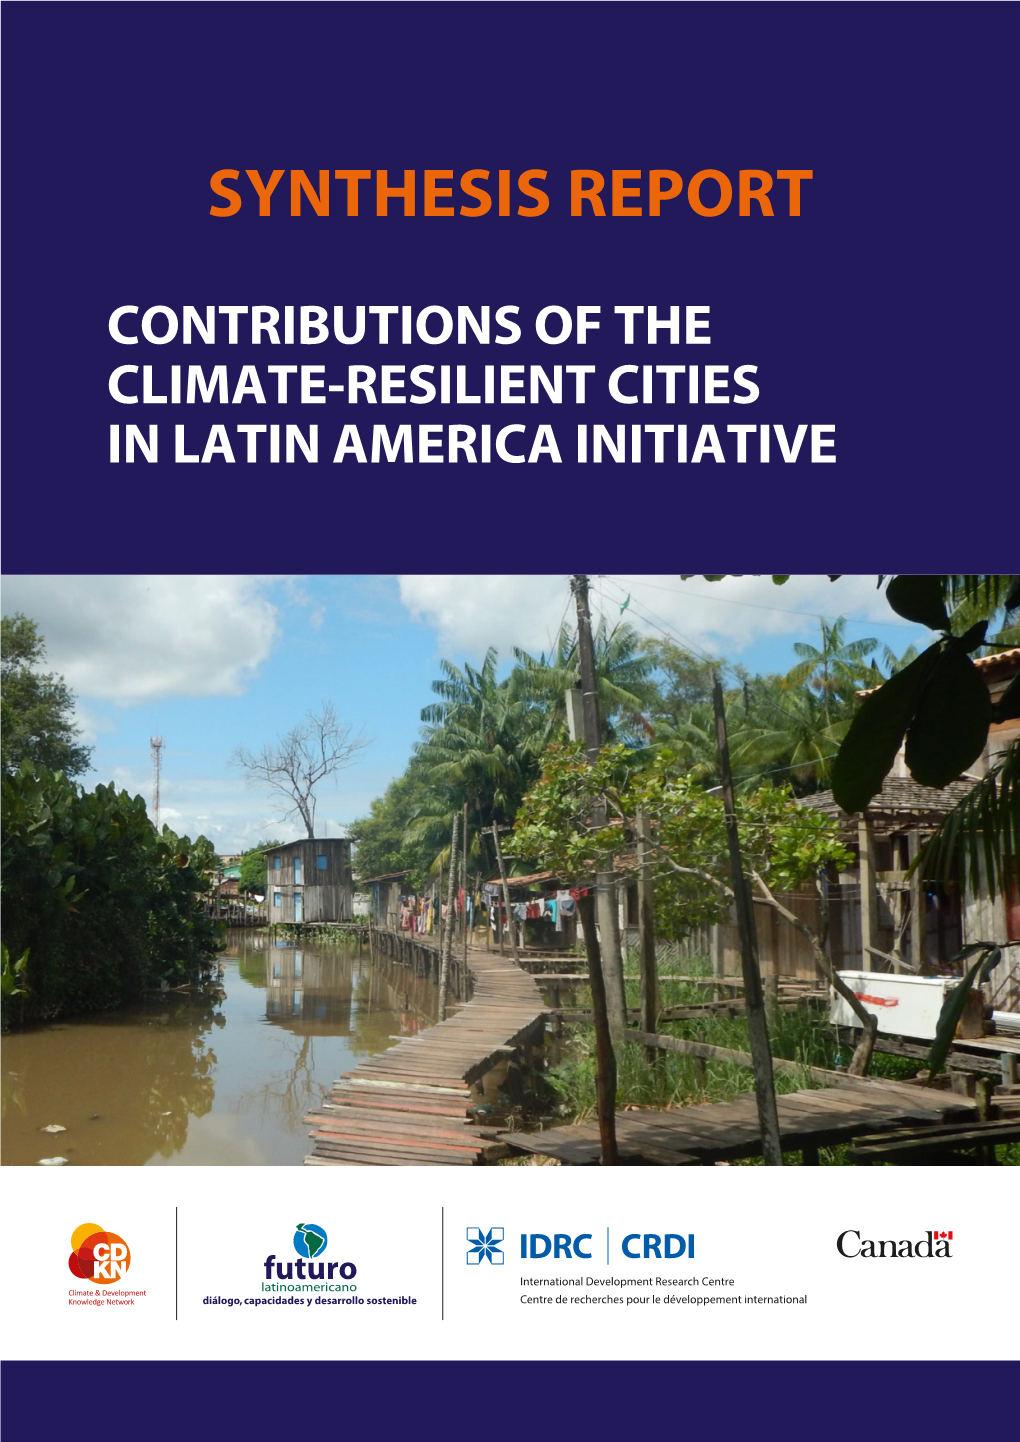 Contributions of the Climate-Resilient Cities in Latin America Initiative